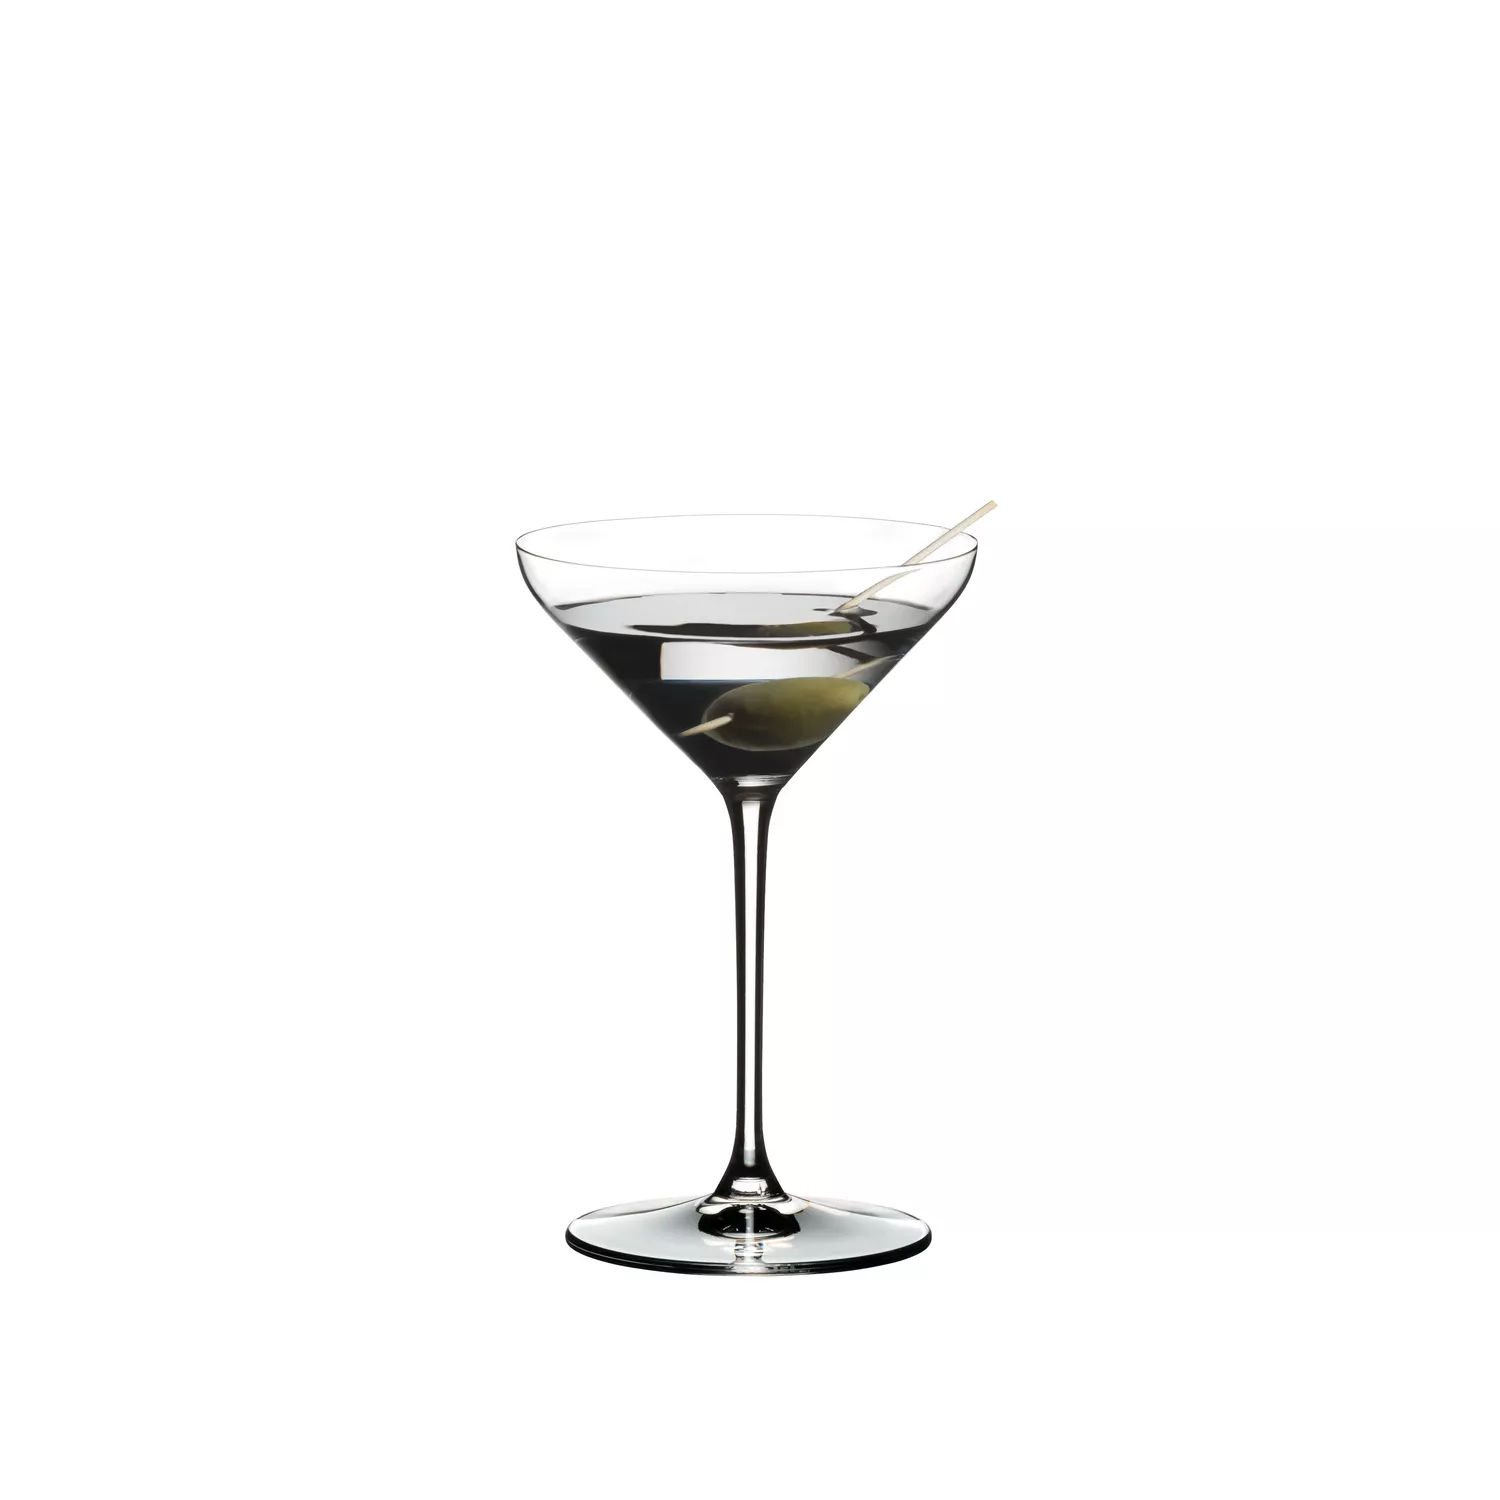 RIEDEL Extreme Martini Glass, Set of 2